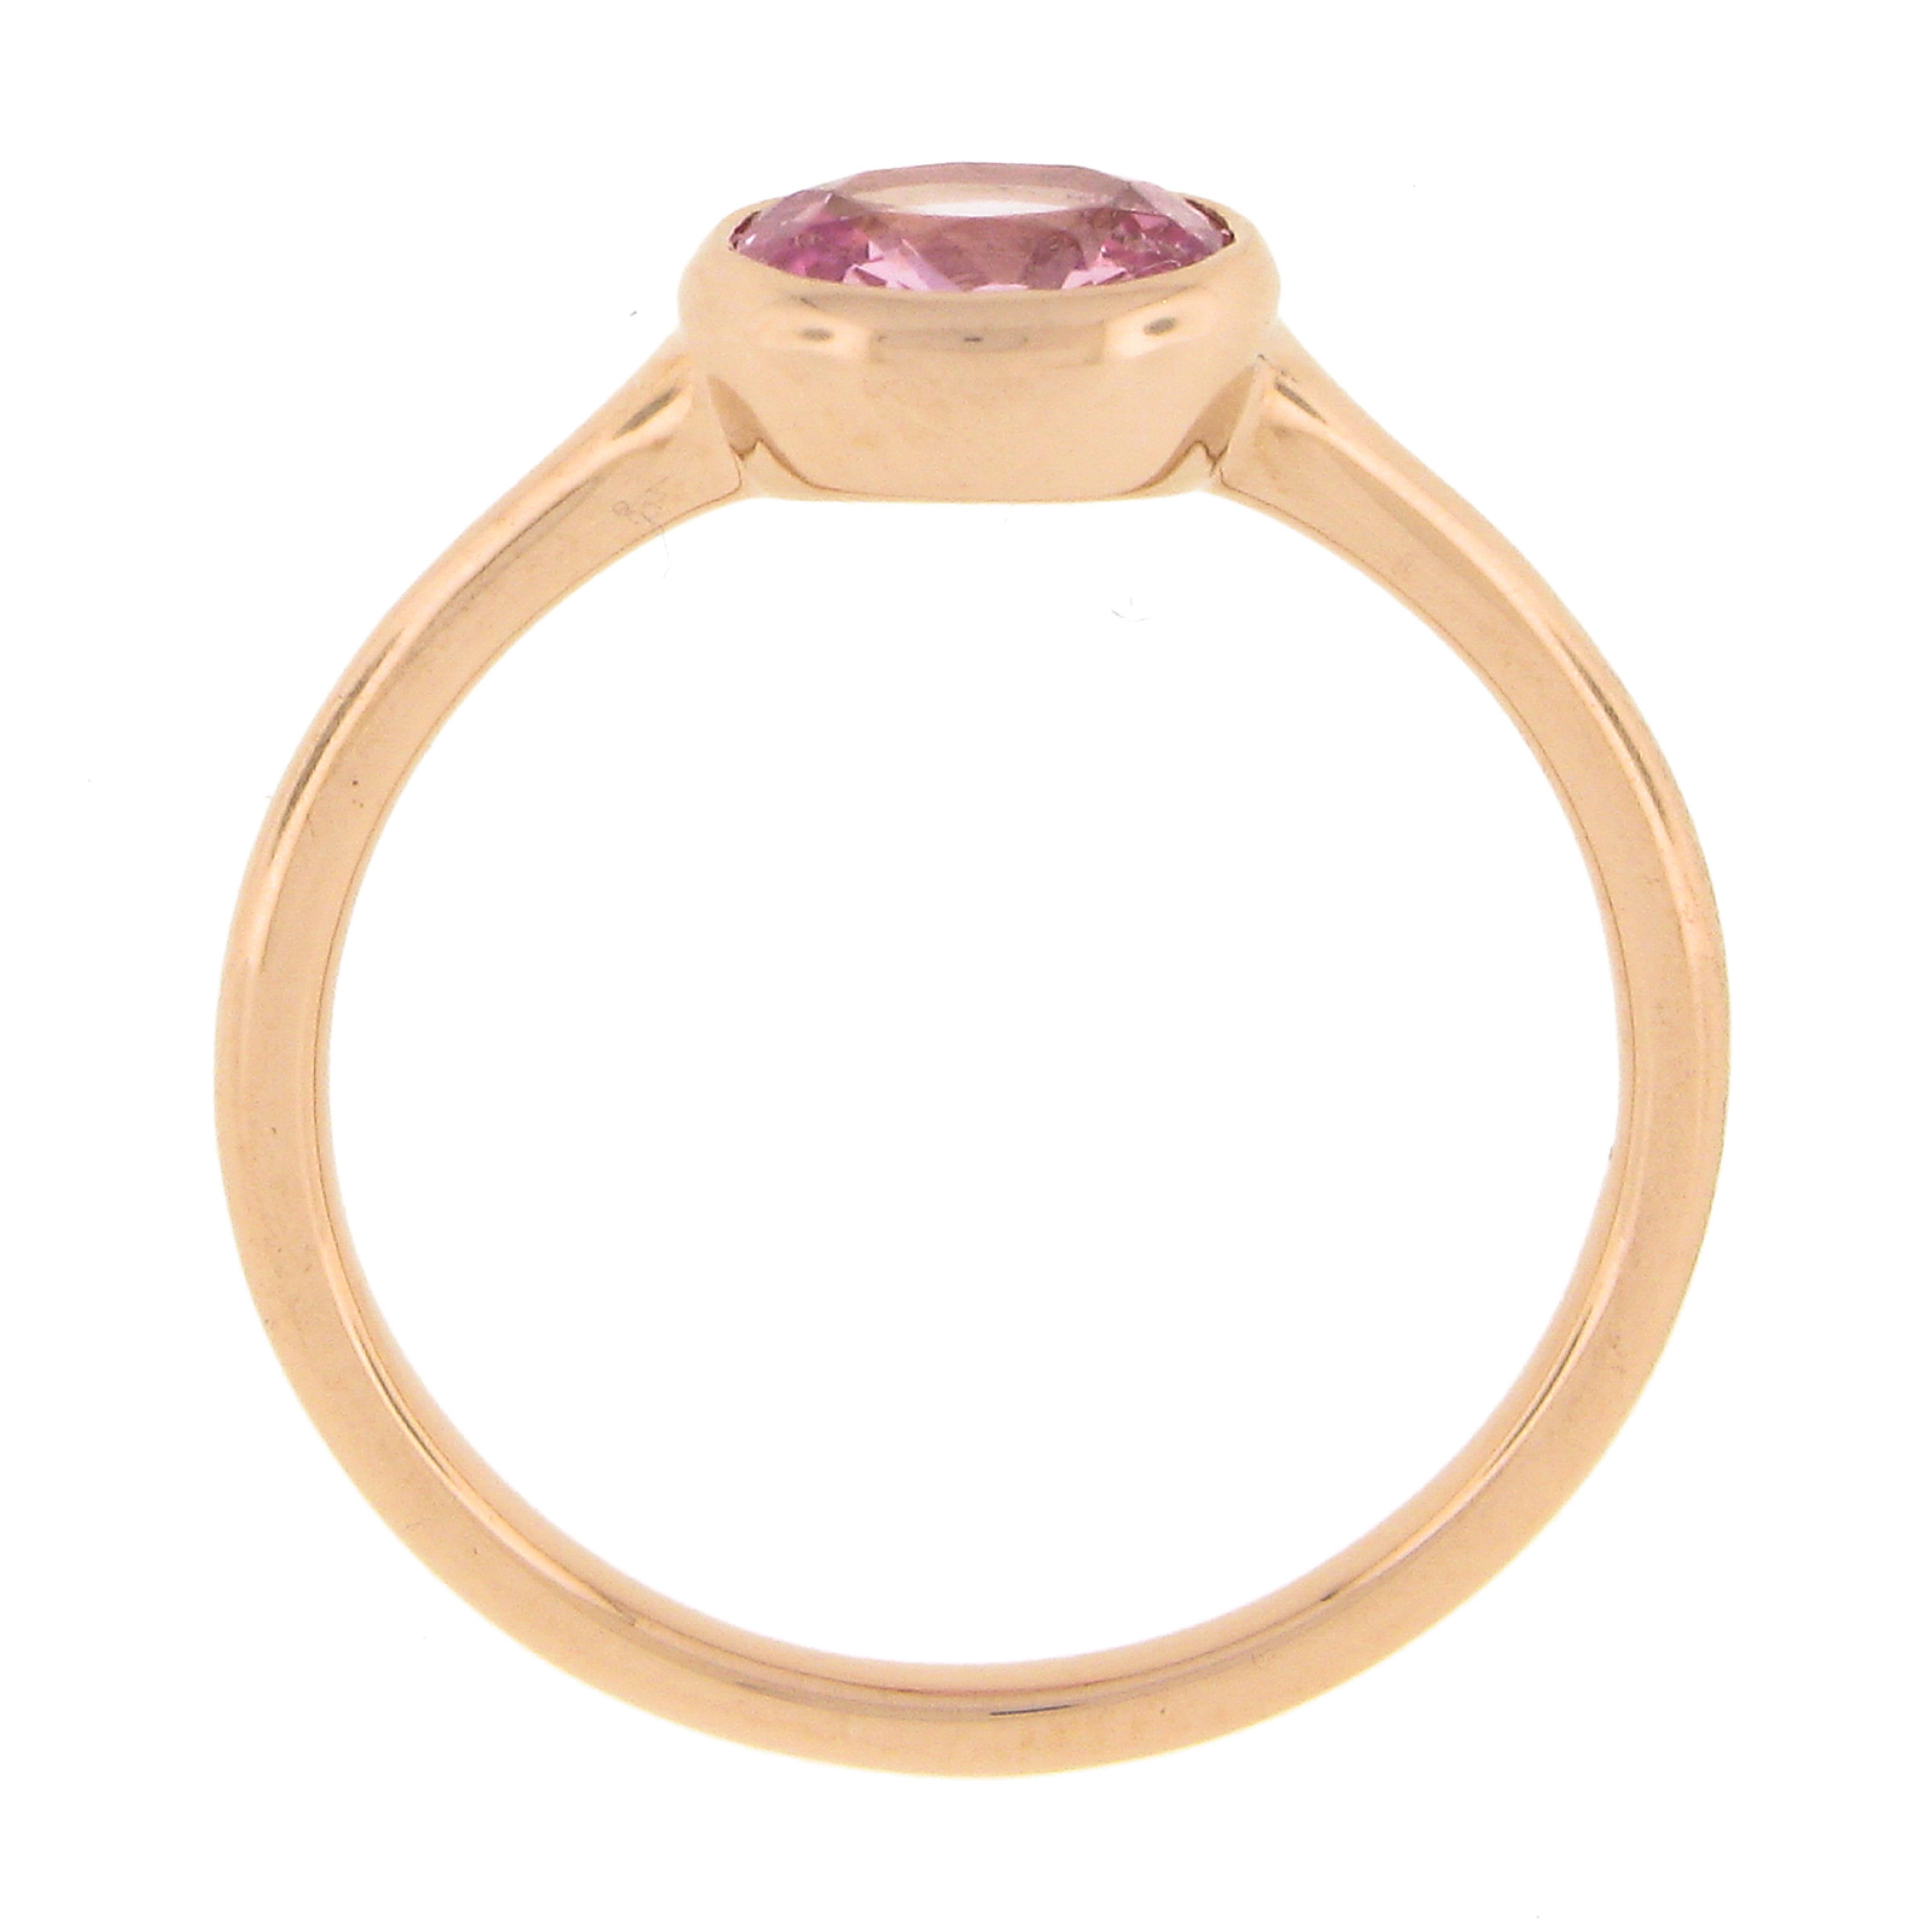 NEW 14k Rose Gold 1.29ctw GIA Oval Orangy Pink Sapphire Bezel Solitaire Ring en vente 4